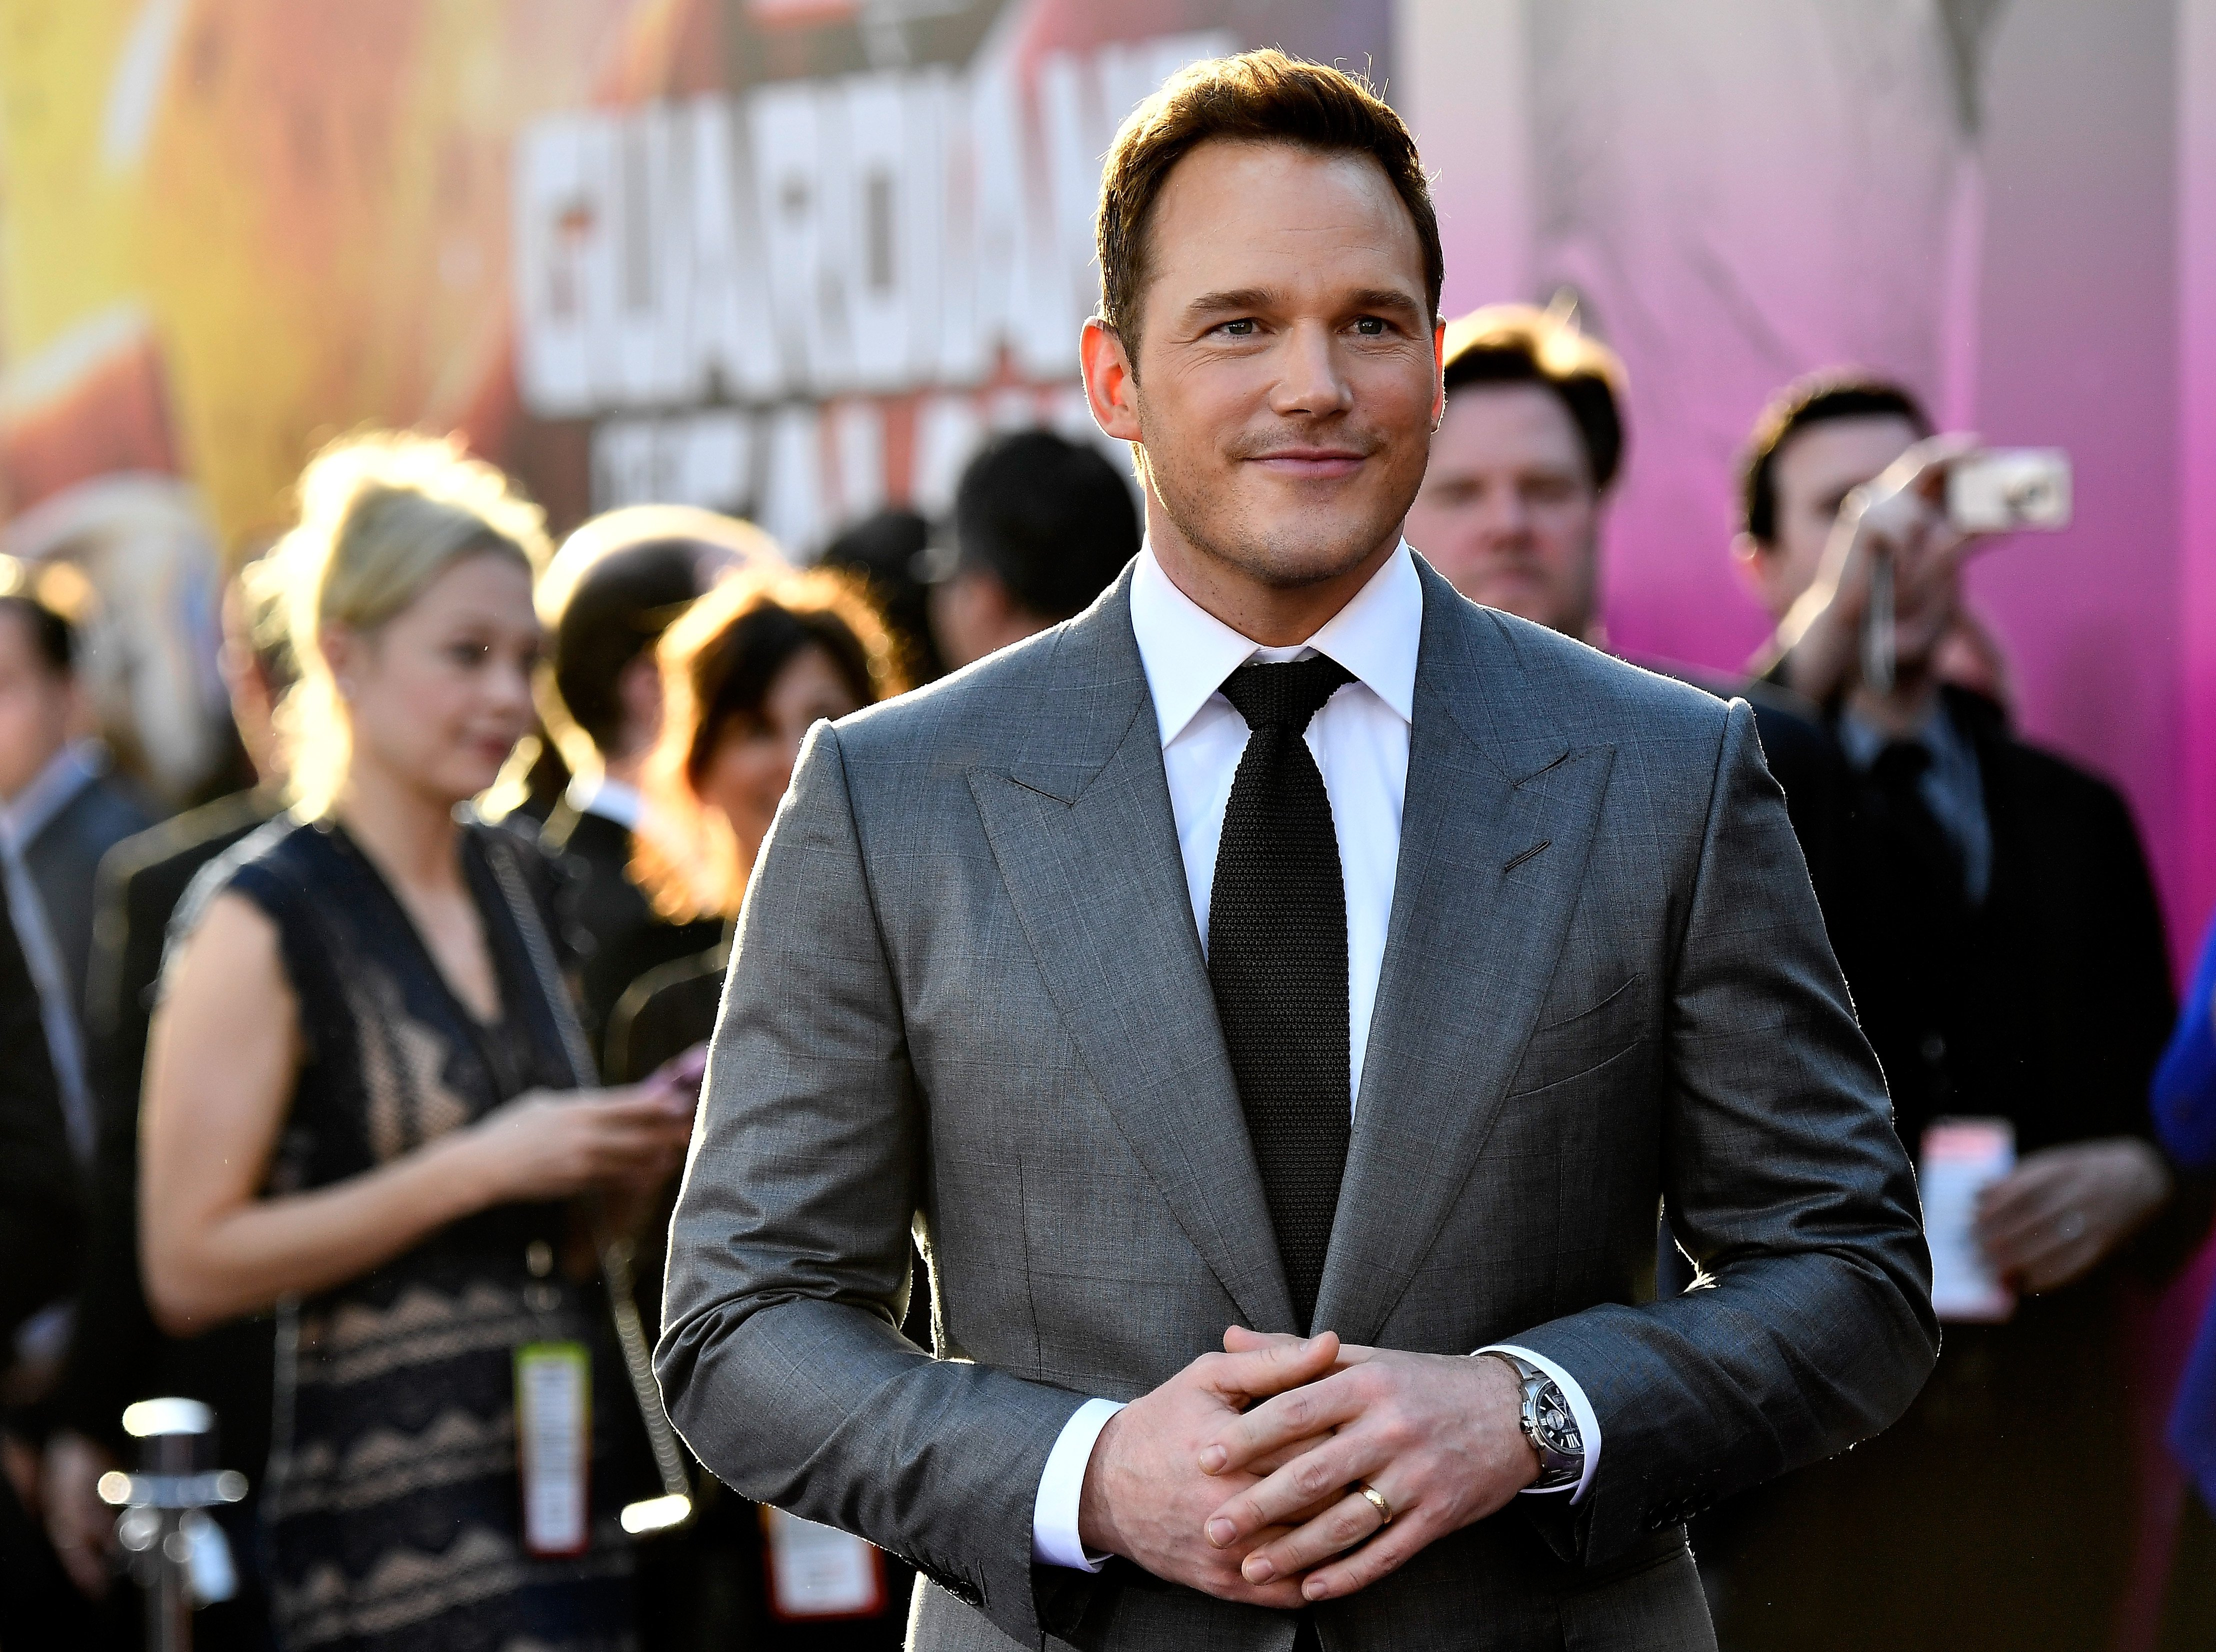 Chris Pratt arrives at the premiere of Disney and Marvel's "Guardians Of The Galaxy Vol. 2" at Dolby Theatre on April 19, 2017 in Hollywood, California. | Source: Getty Images